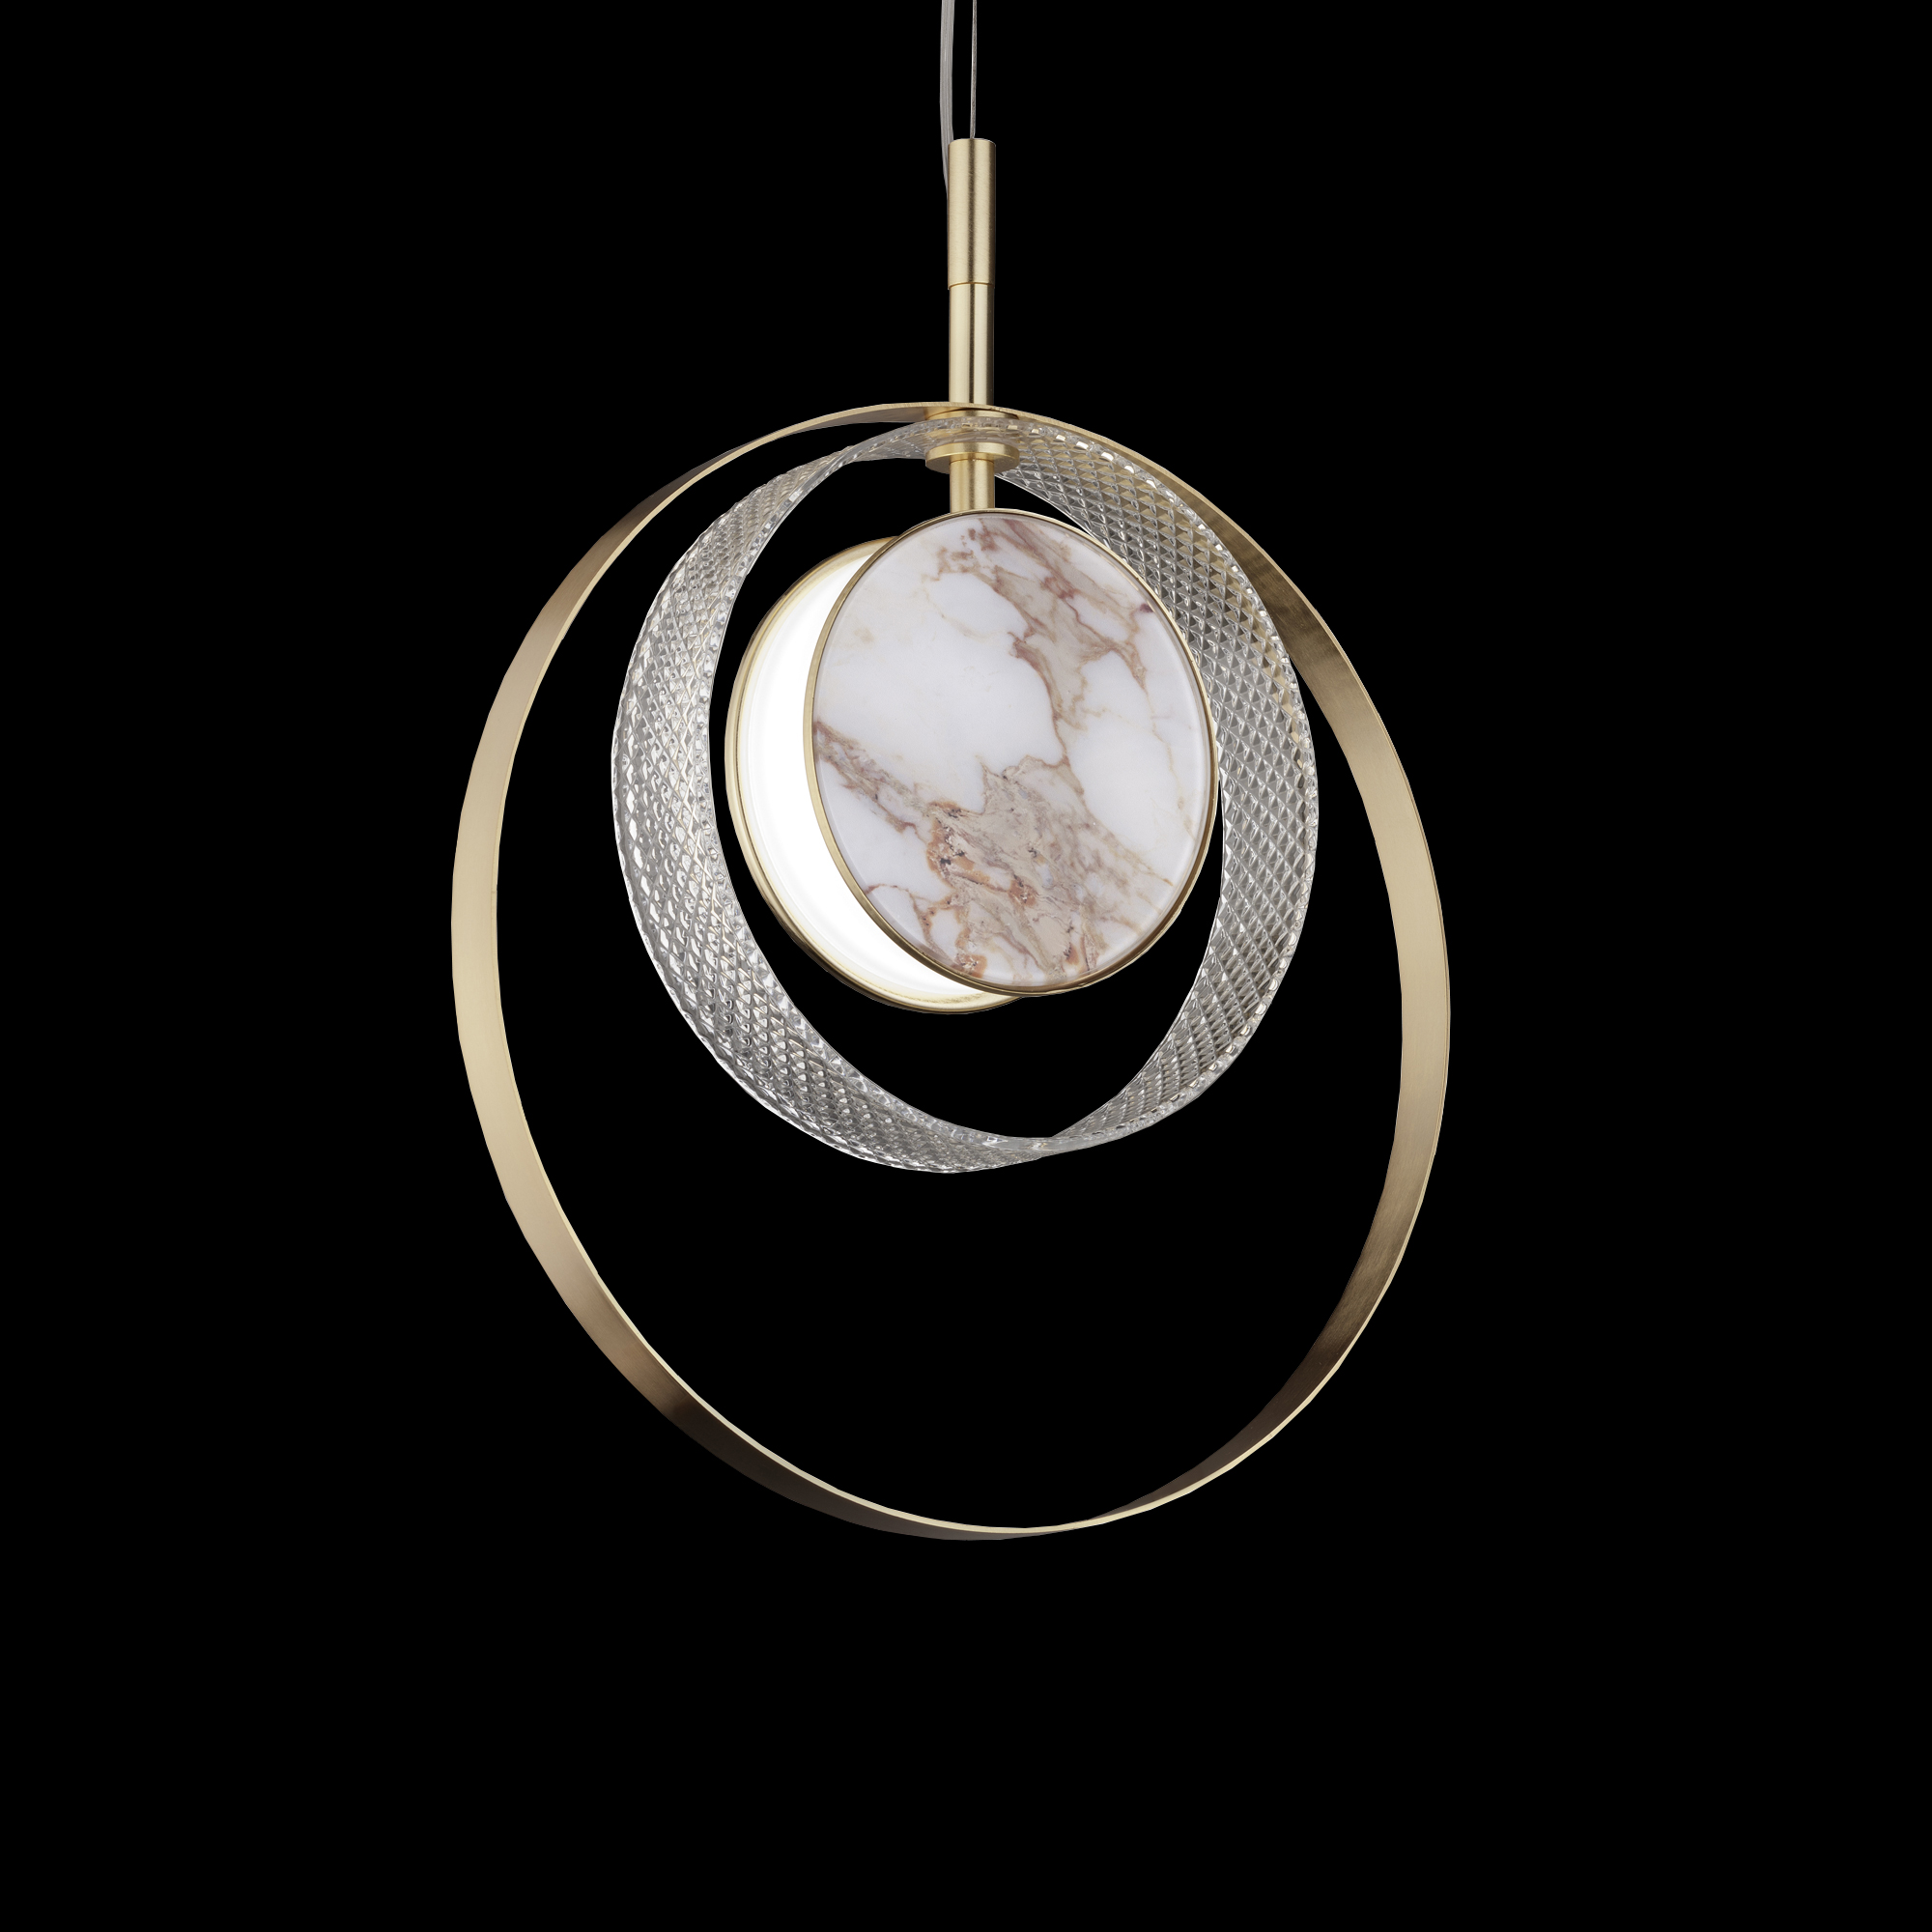 Contemporary Round Pendant Light With Marble Effect